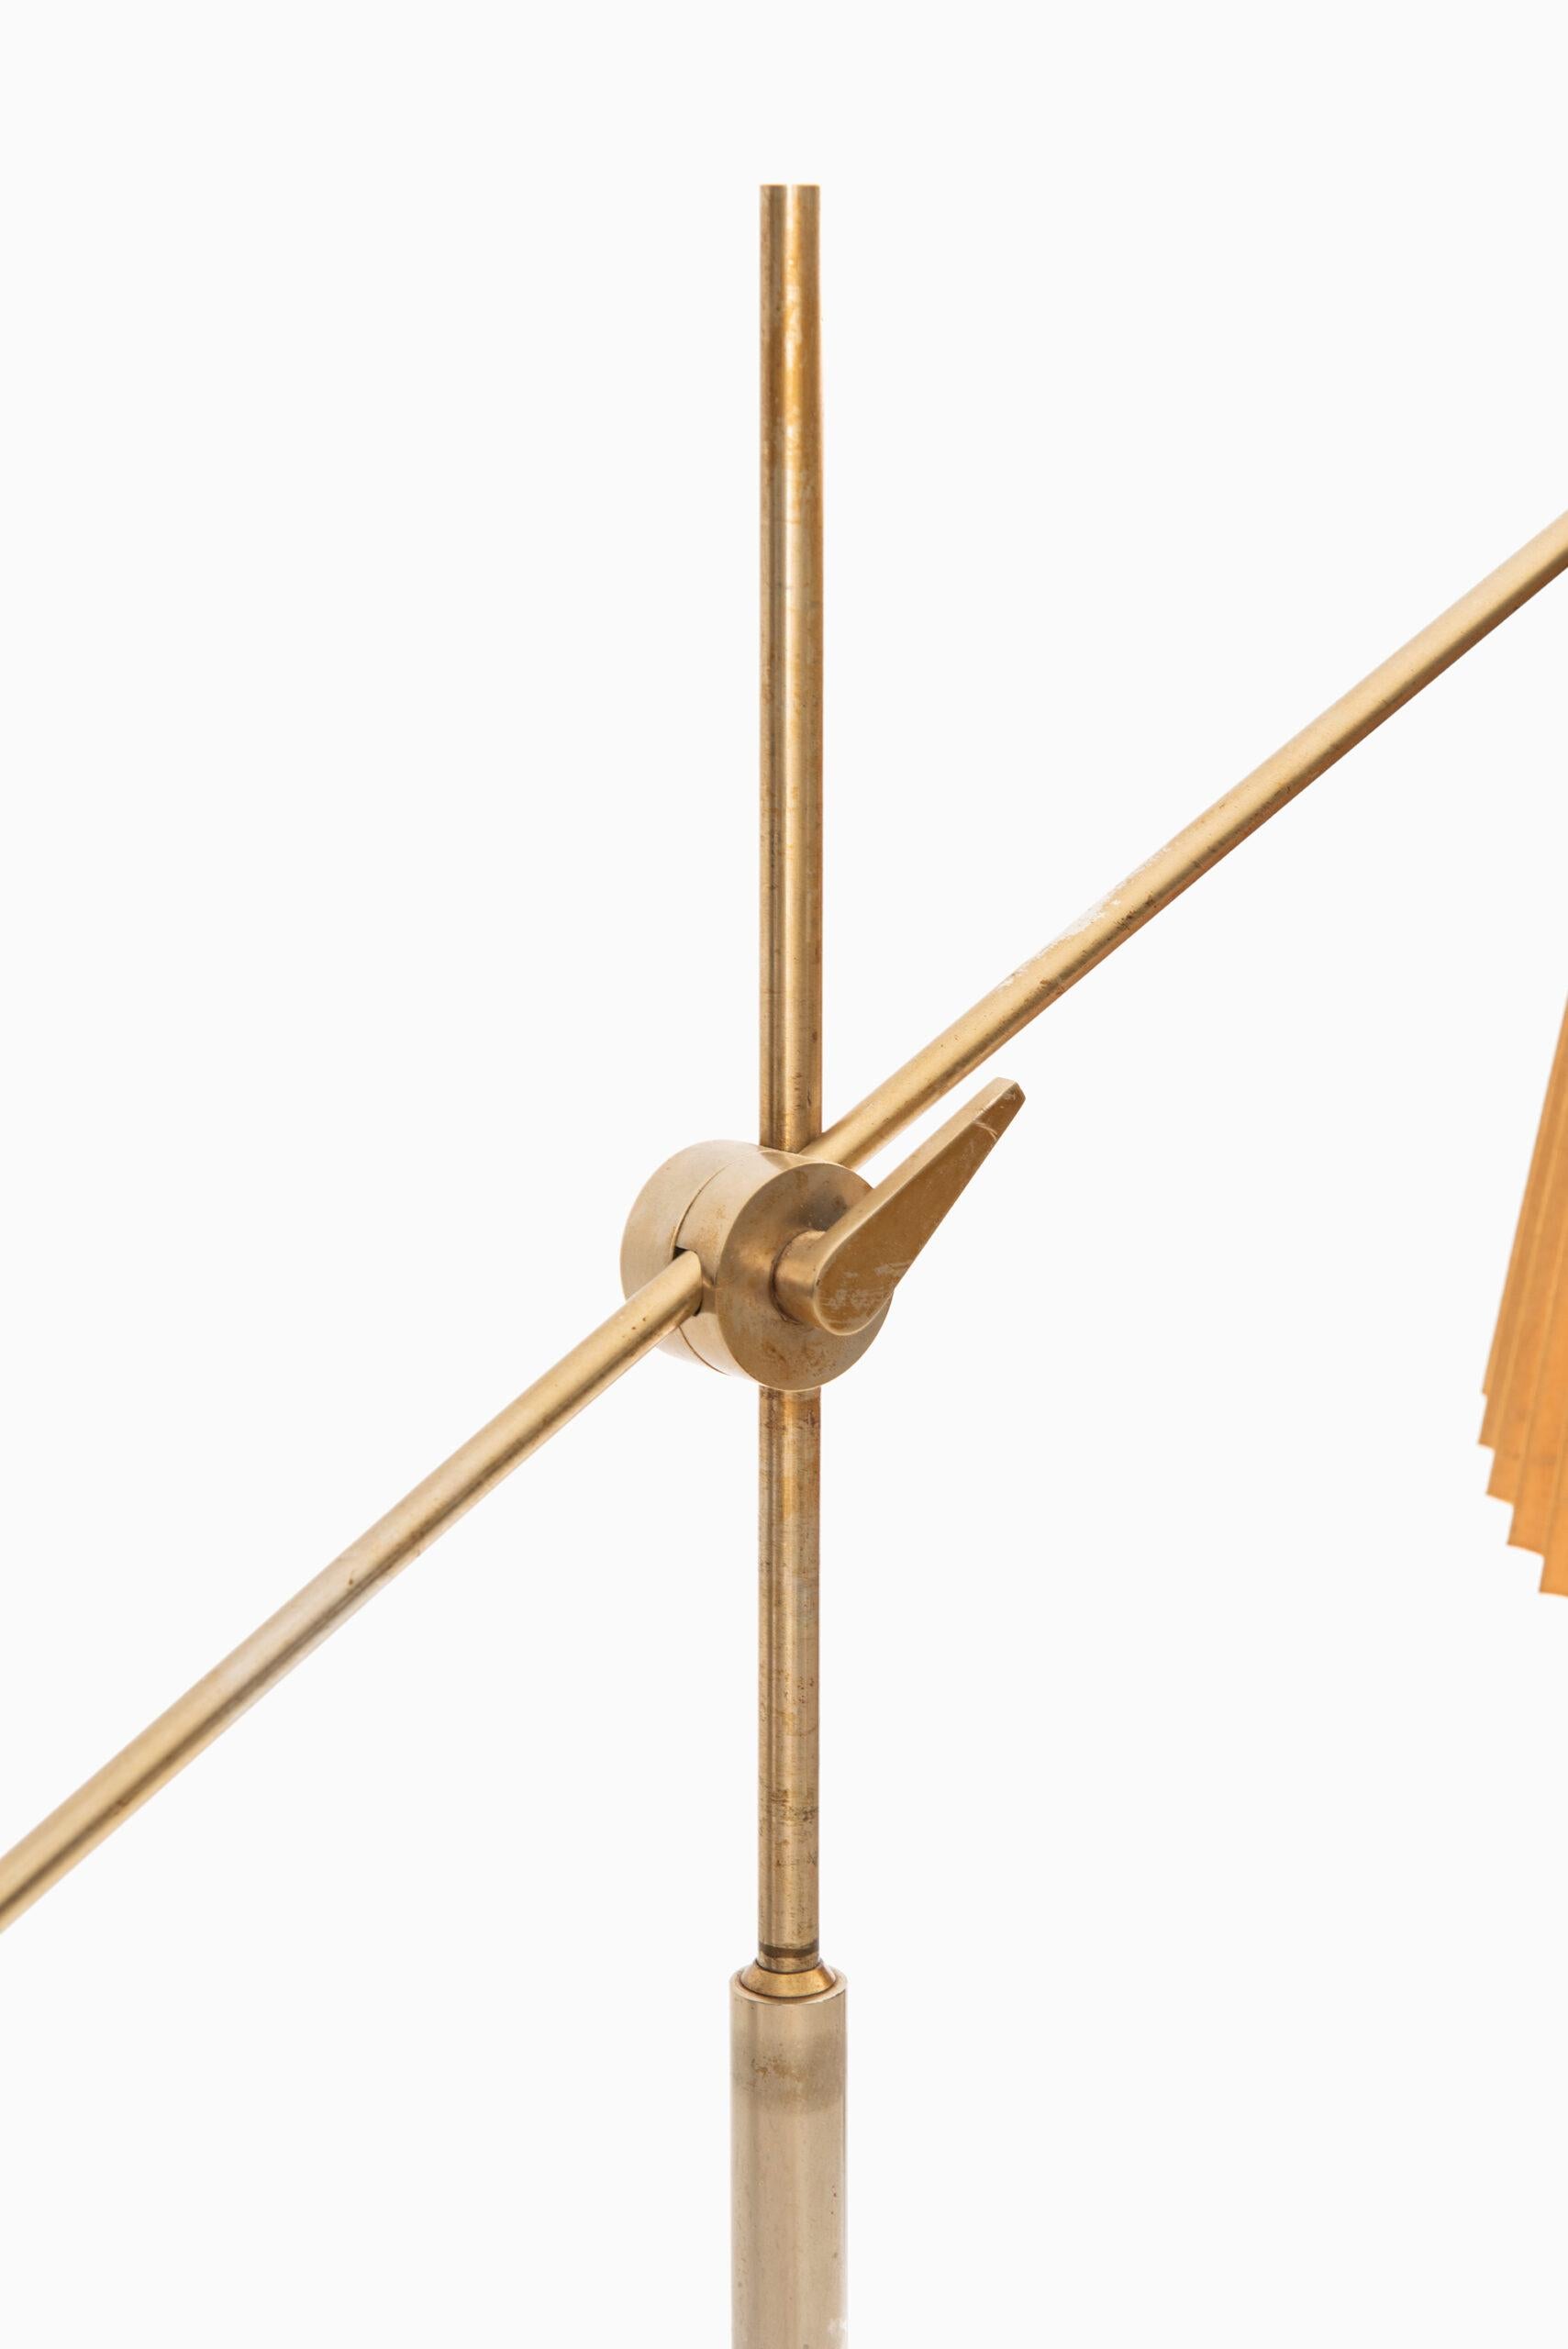 Mid-20th Century Poul Dinesen Floor Lamp Produced by Poul Dinesen in Denmark For Sale